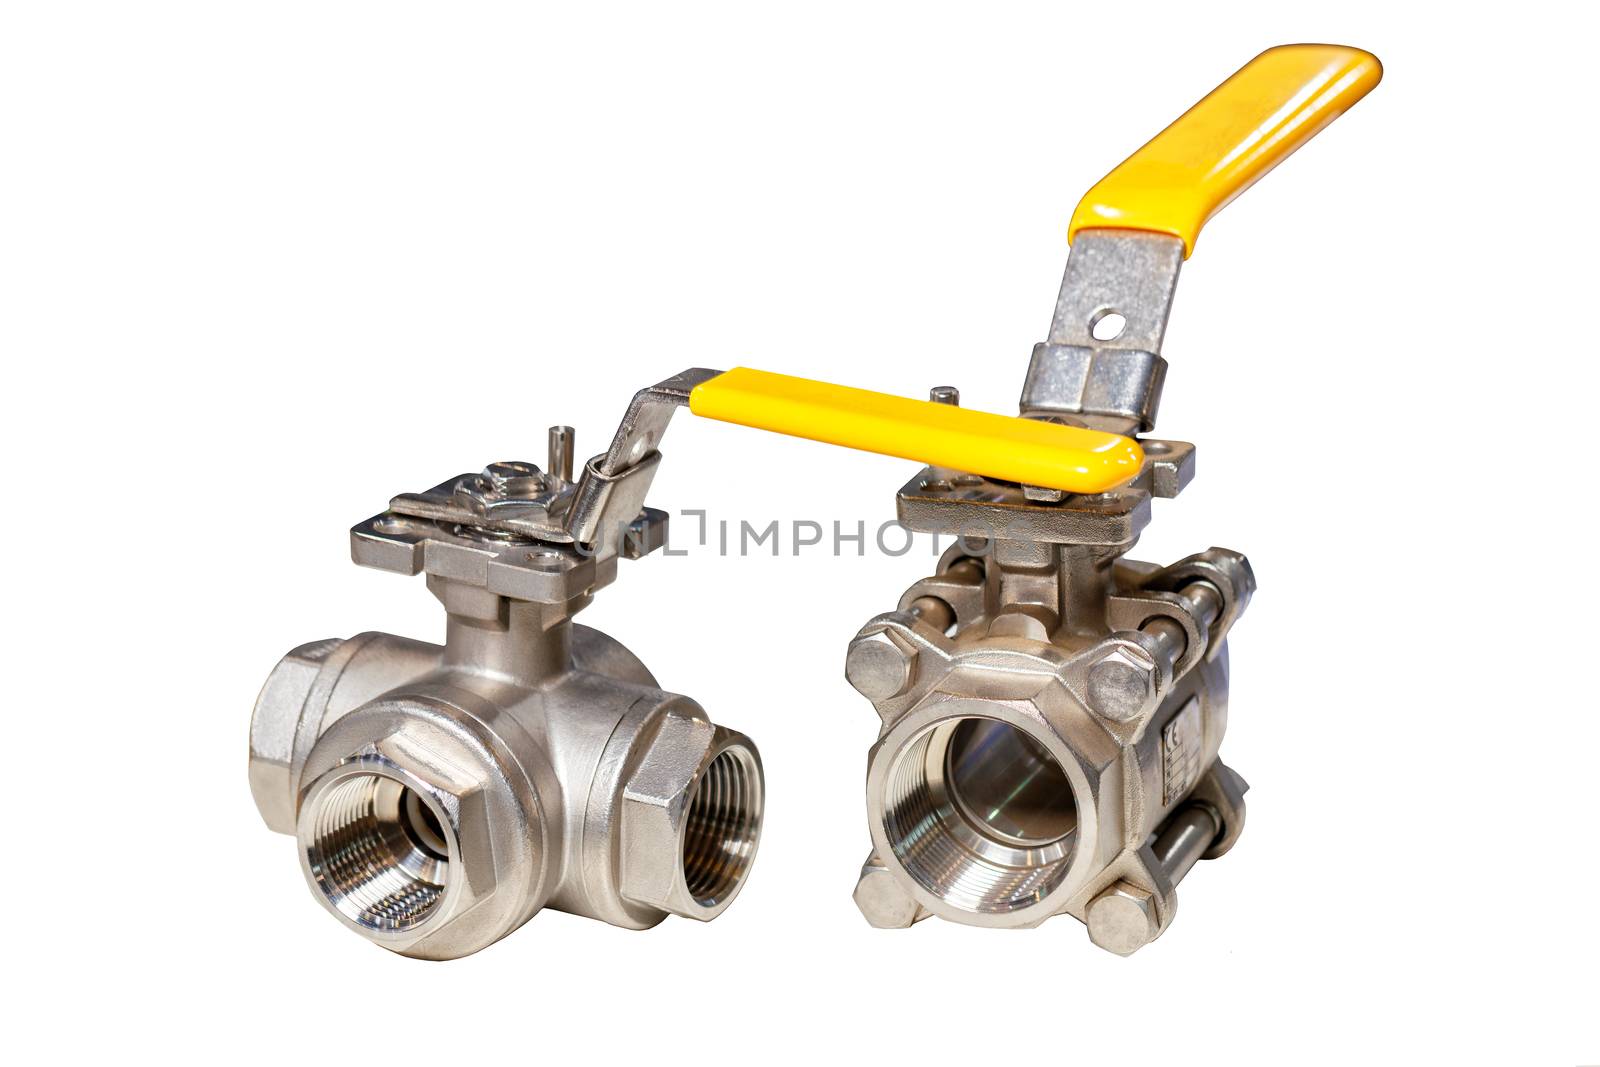 Metal shut-off valves and tees for plumbing pipe connections. by Sergii